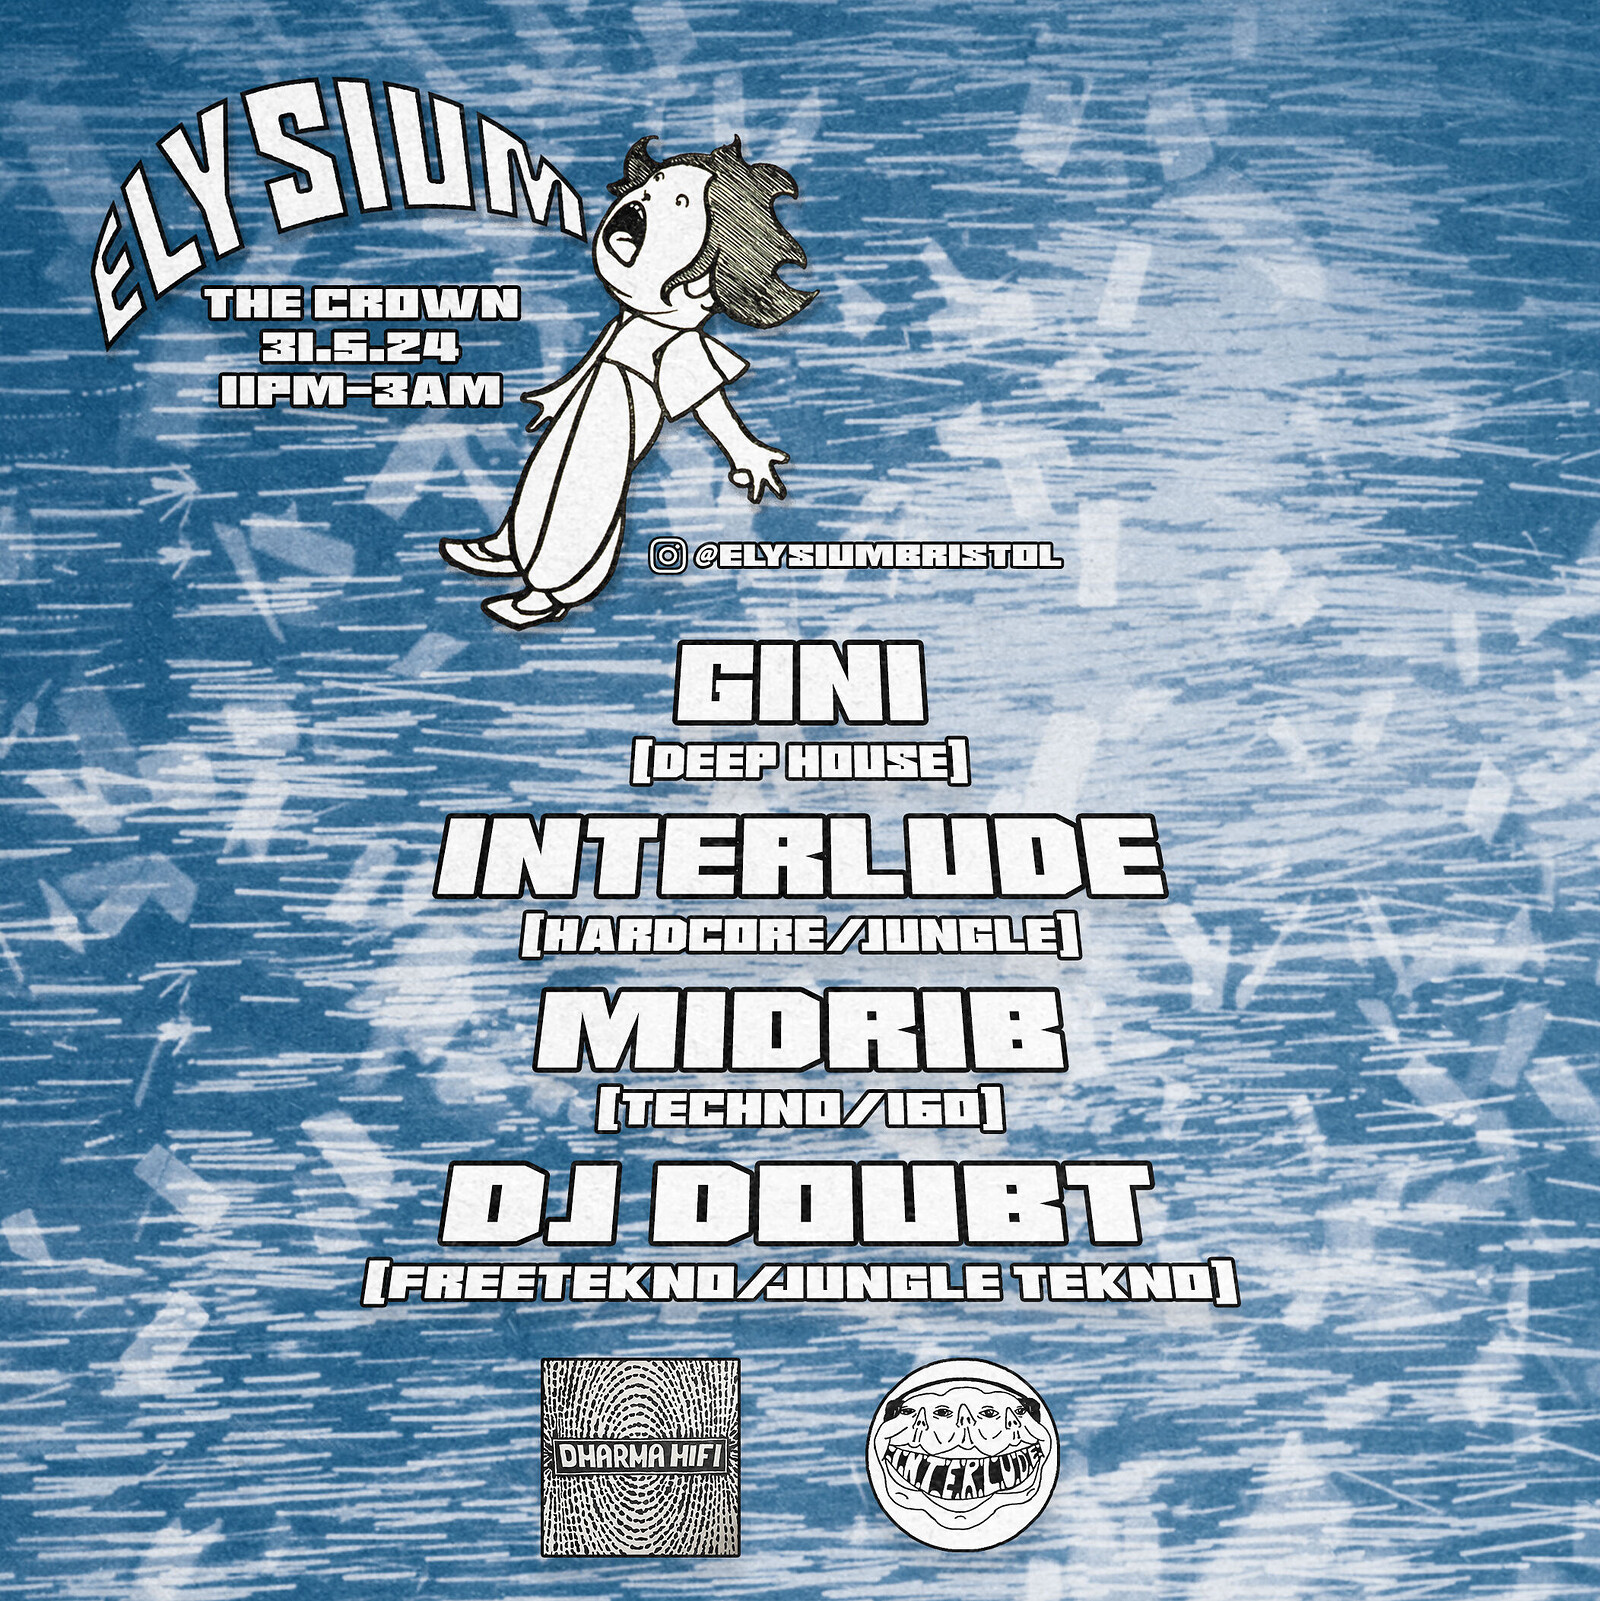 Elysium w/ Midrib, Interlude, DJ Doubt and Gini at The Crown